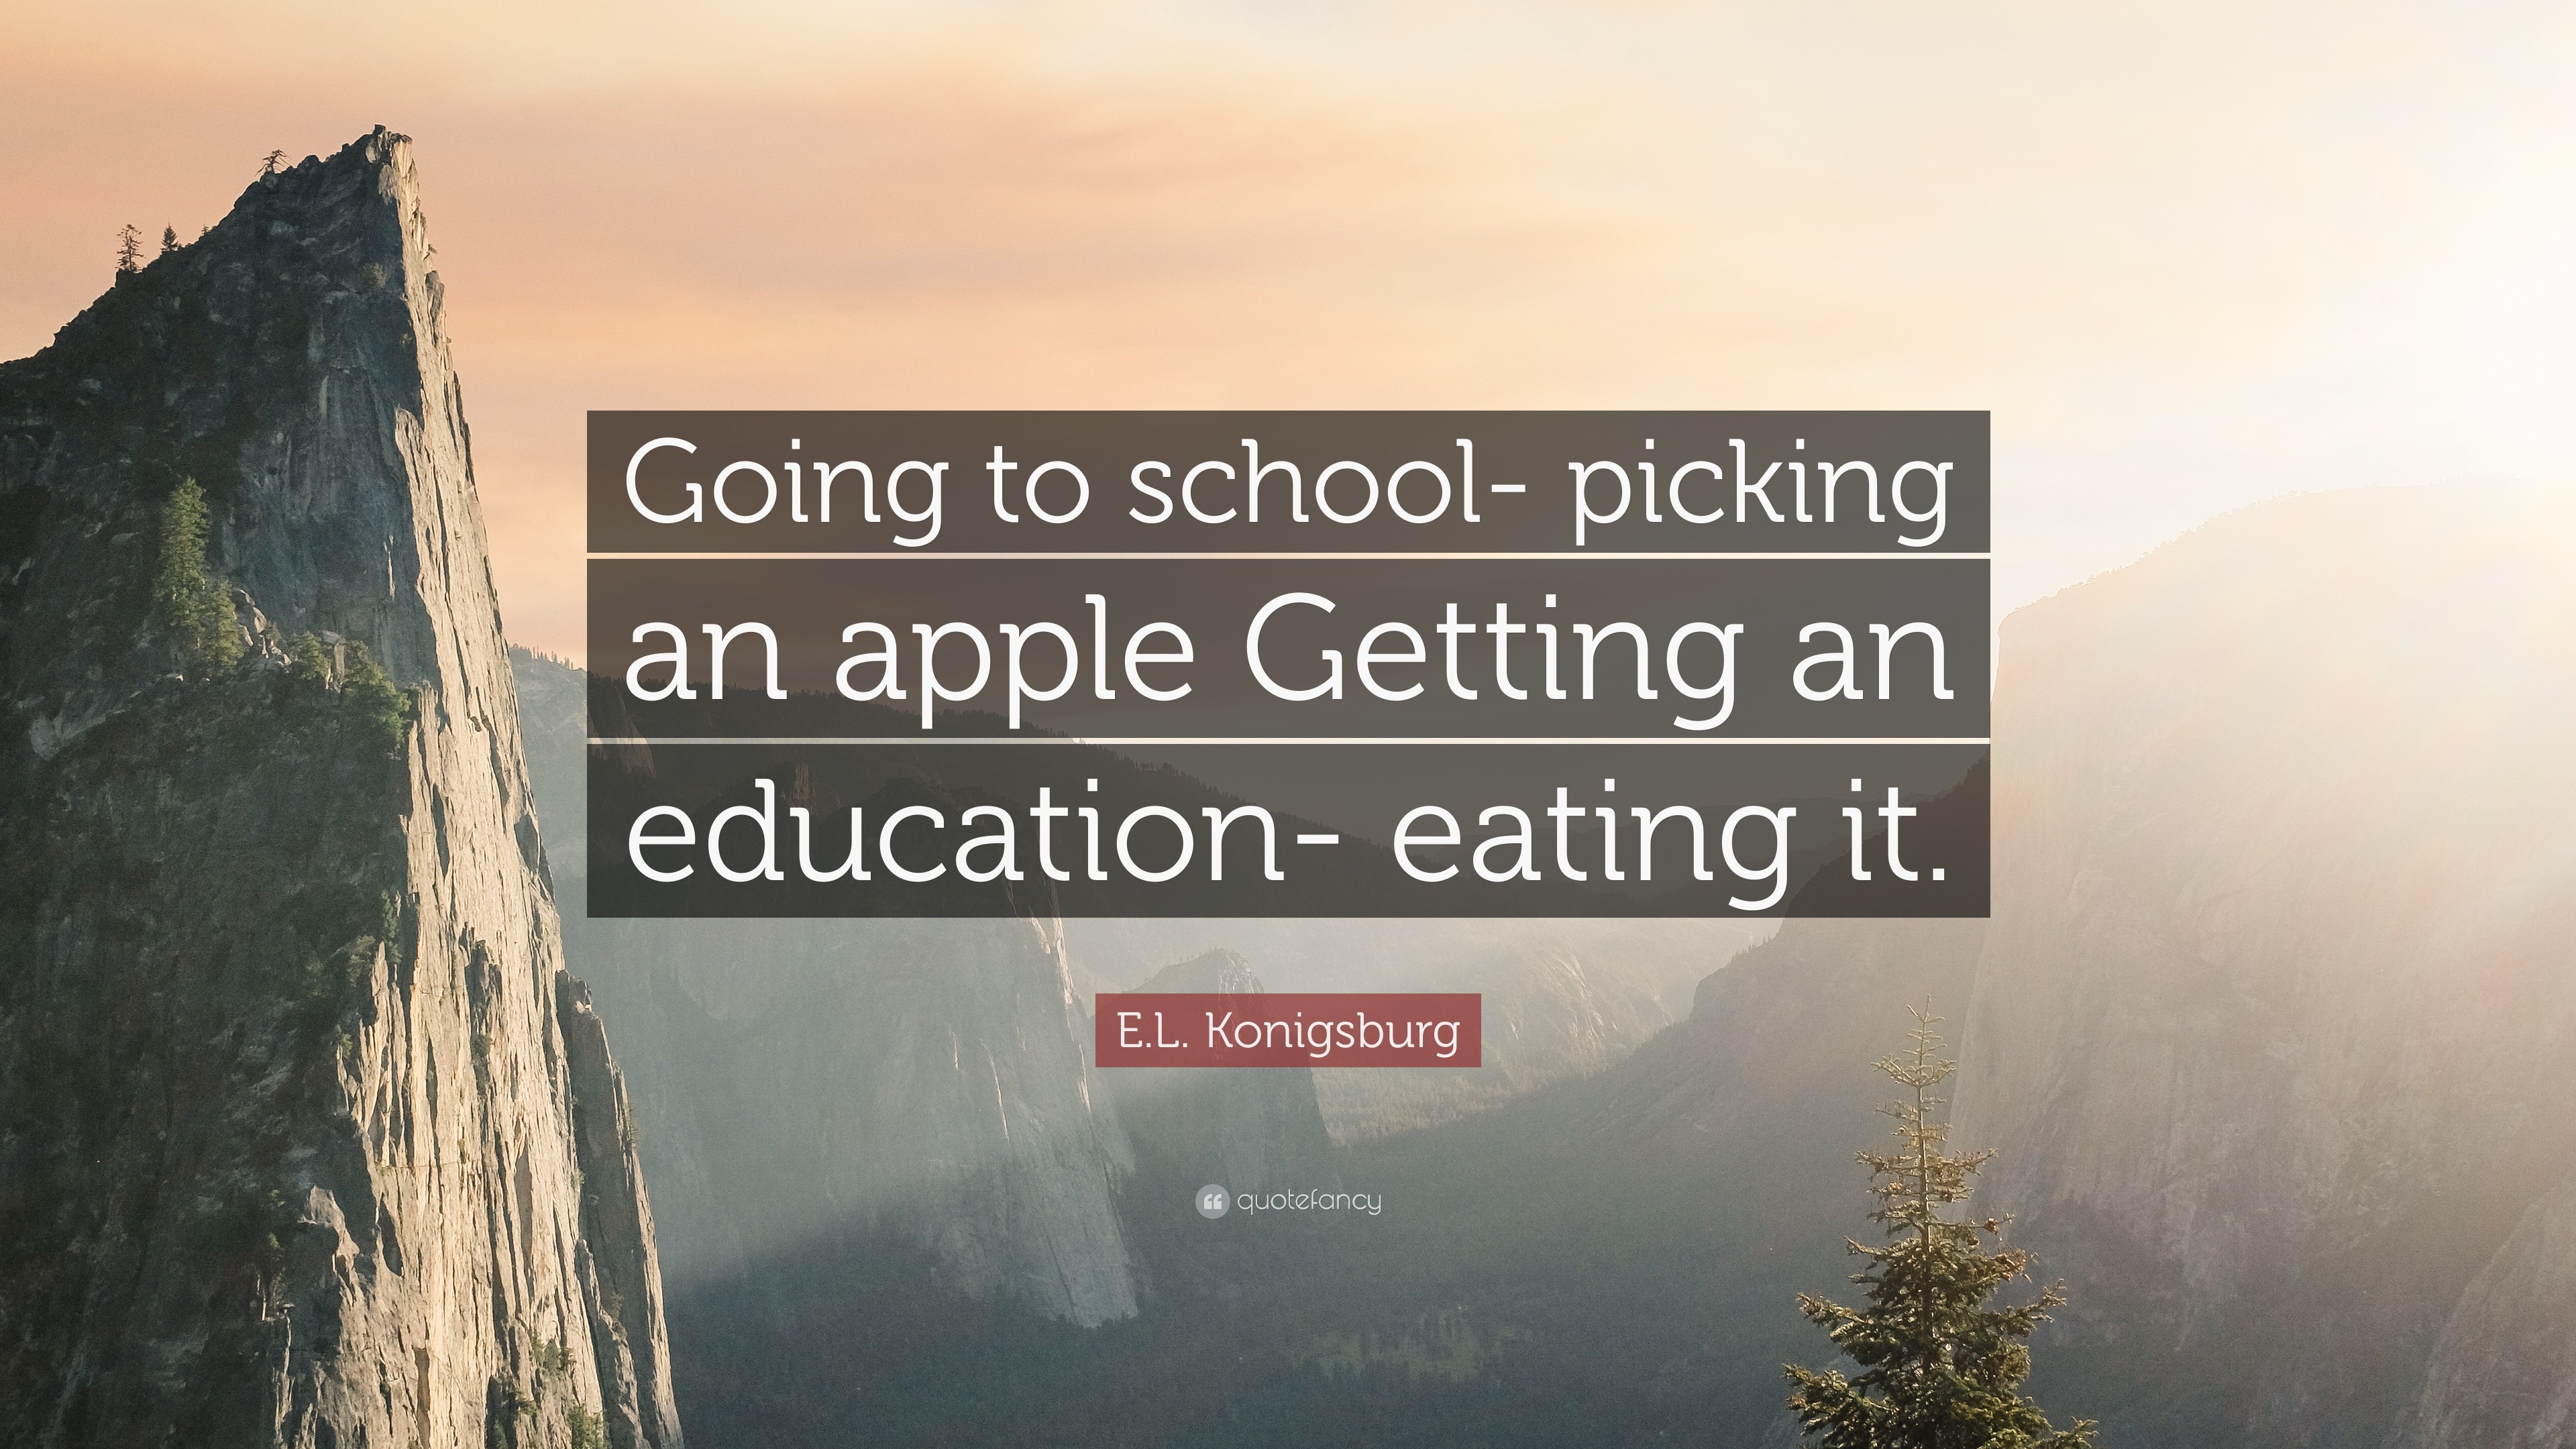 More images for apple picking quotes.